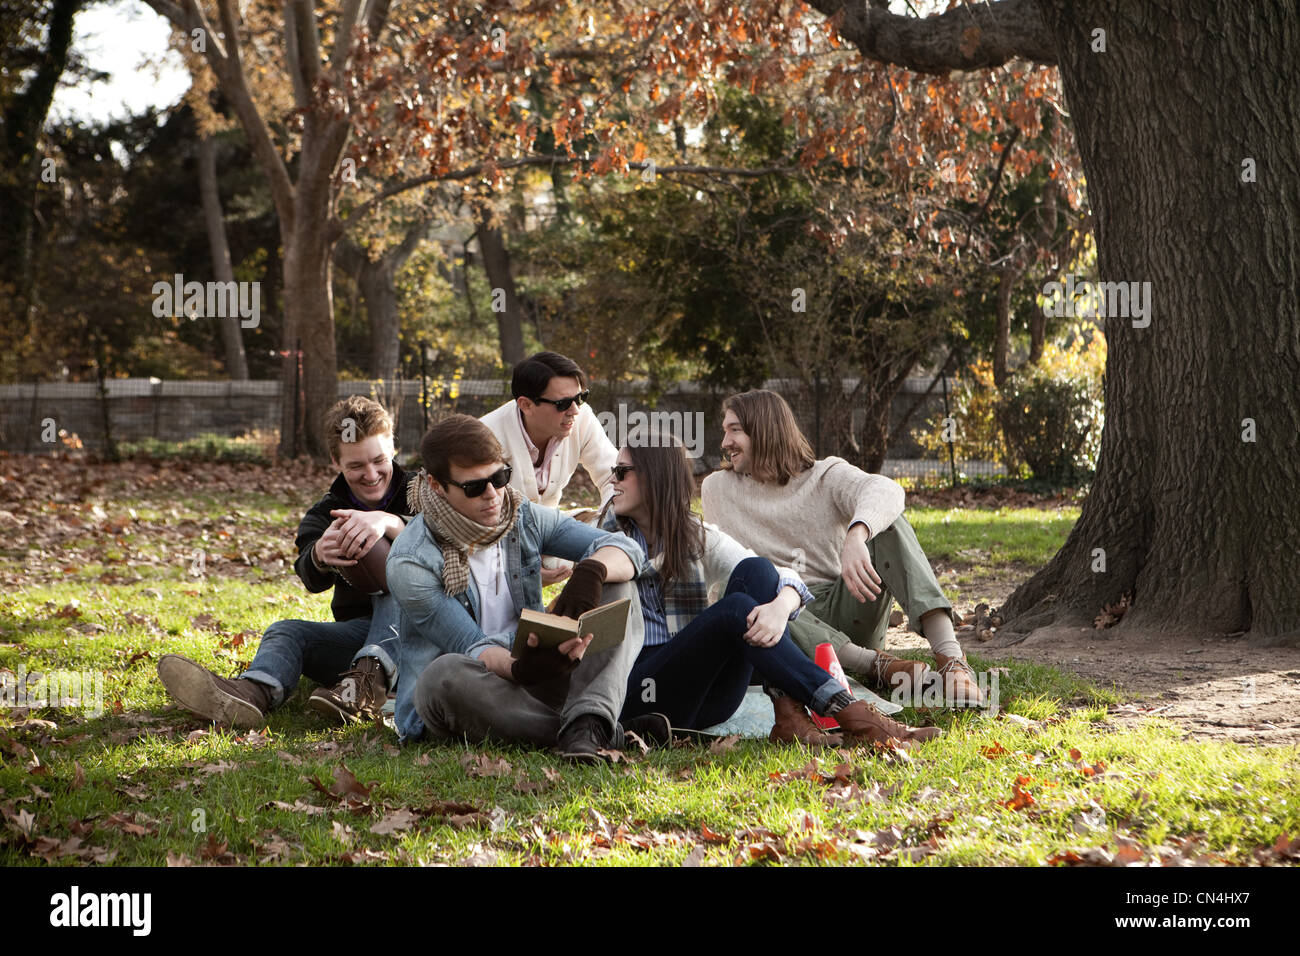 College friends relaxing in park Stock Photo